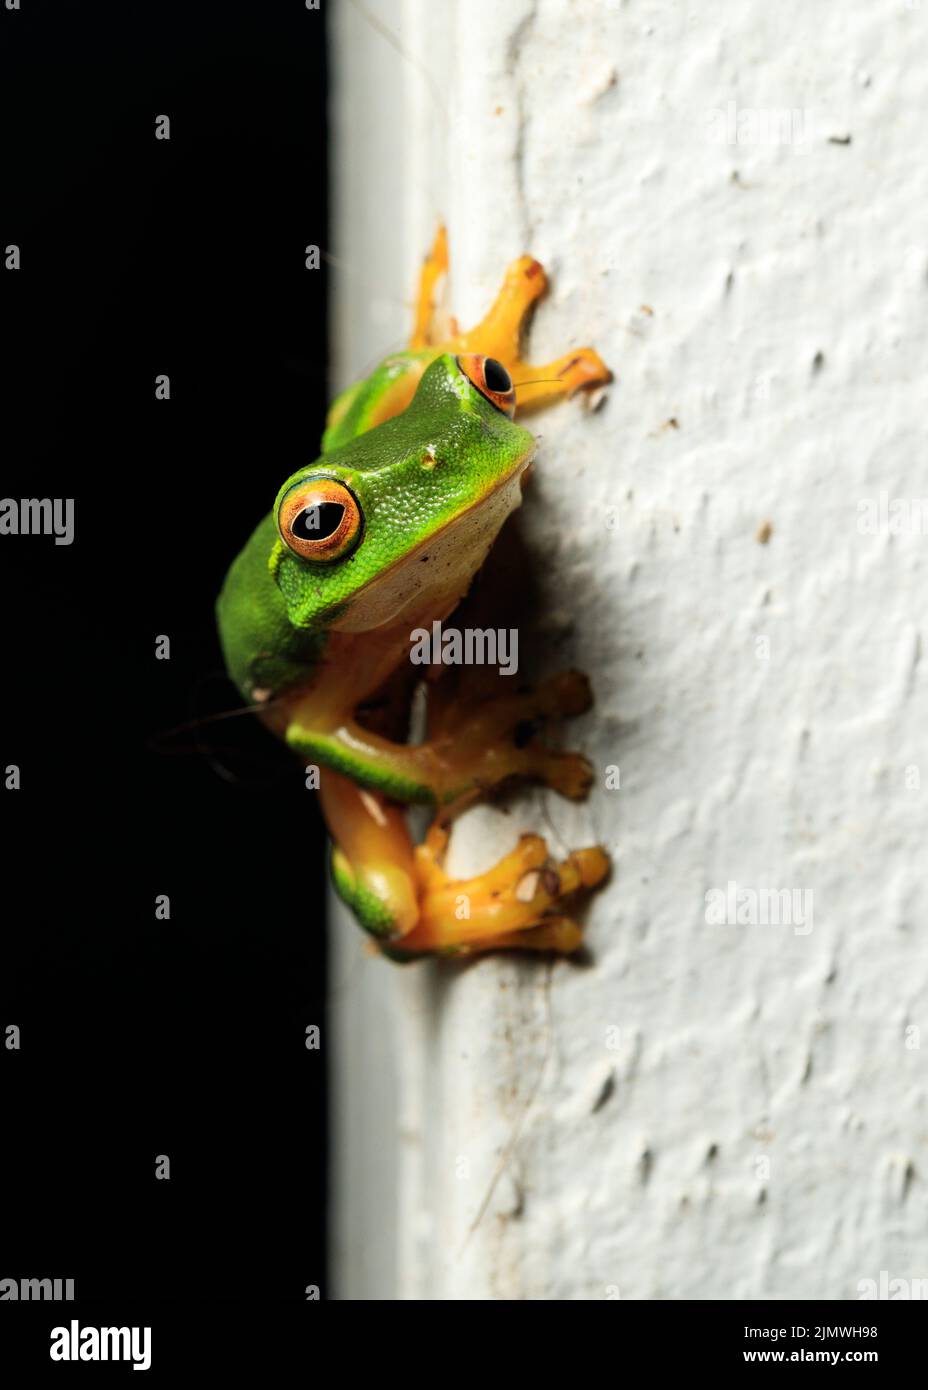 Graceful Tree Frog (Litoria gracilenta) at a home in Boondall, Queensland, Australia Stock Photo